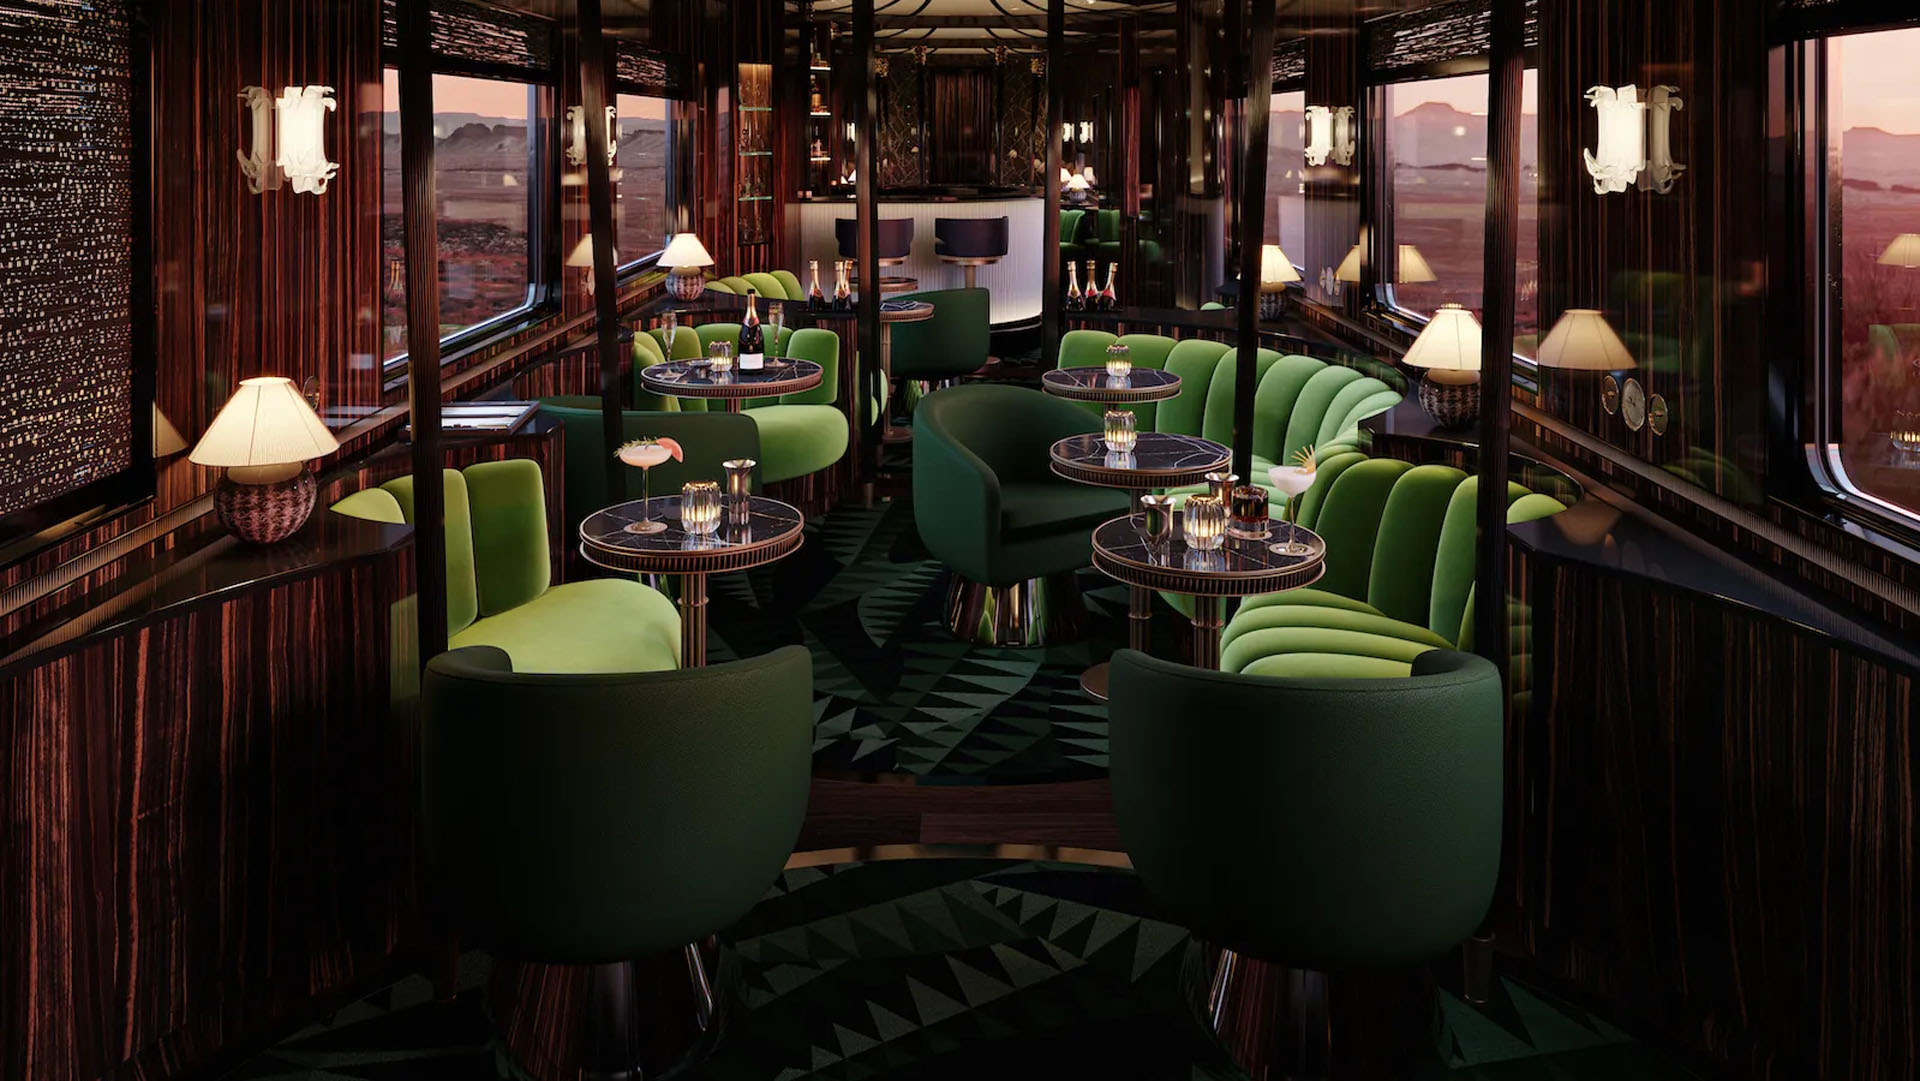 The famed Orient Express to be revived again?